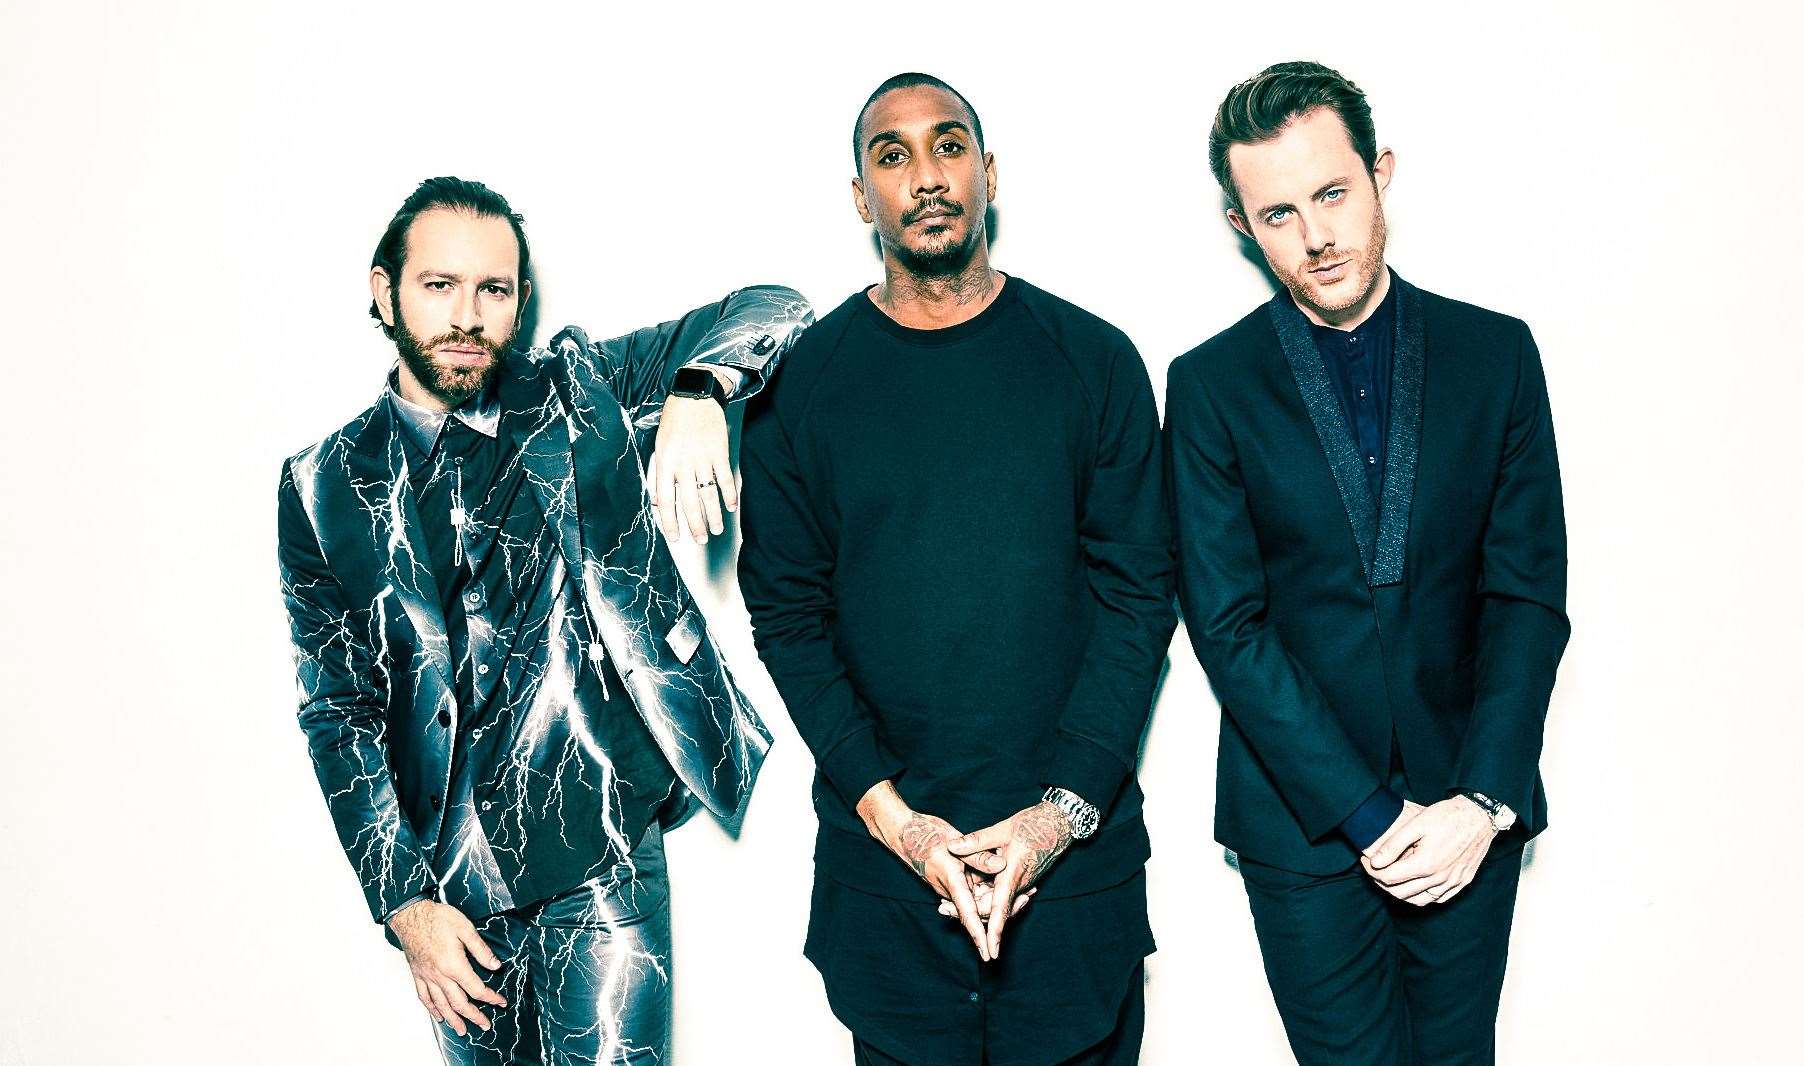 Chase & Status will perform